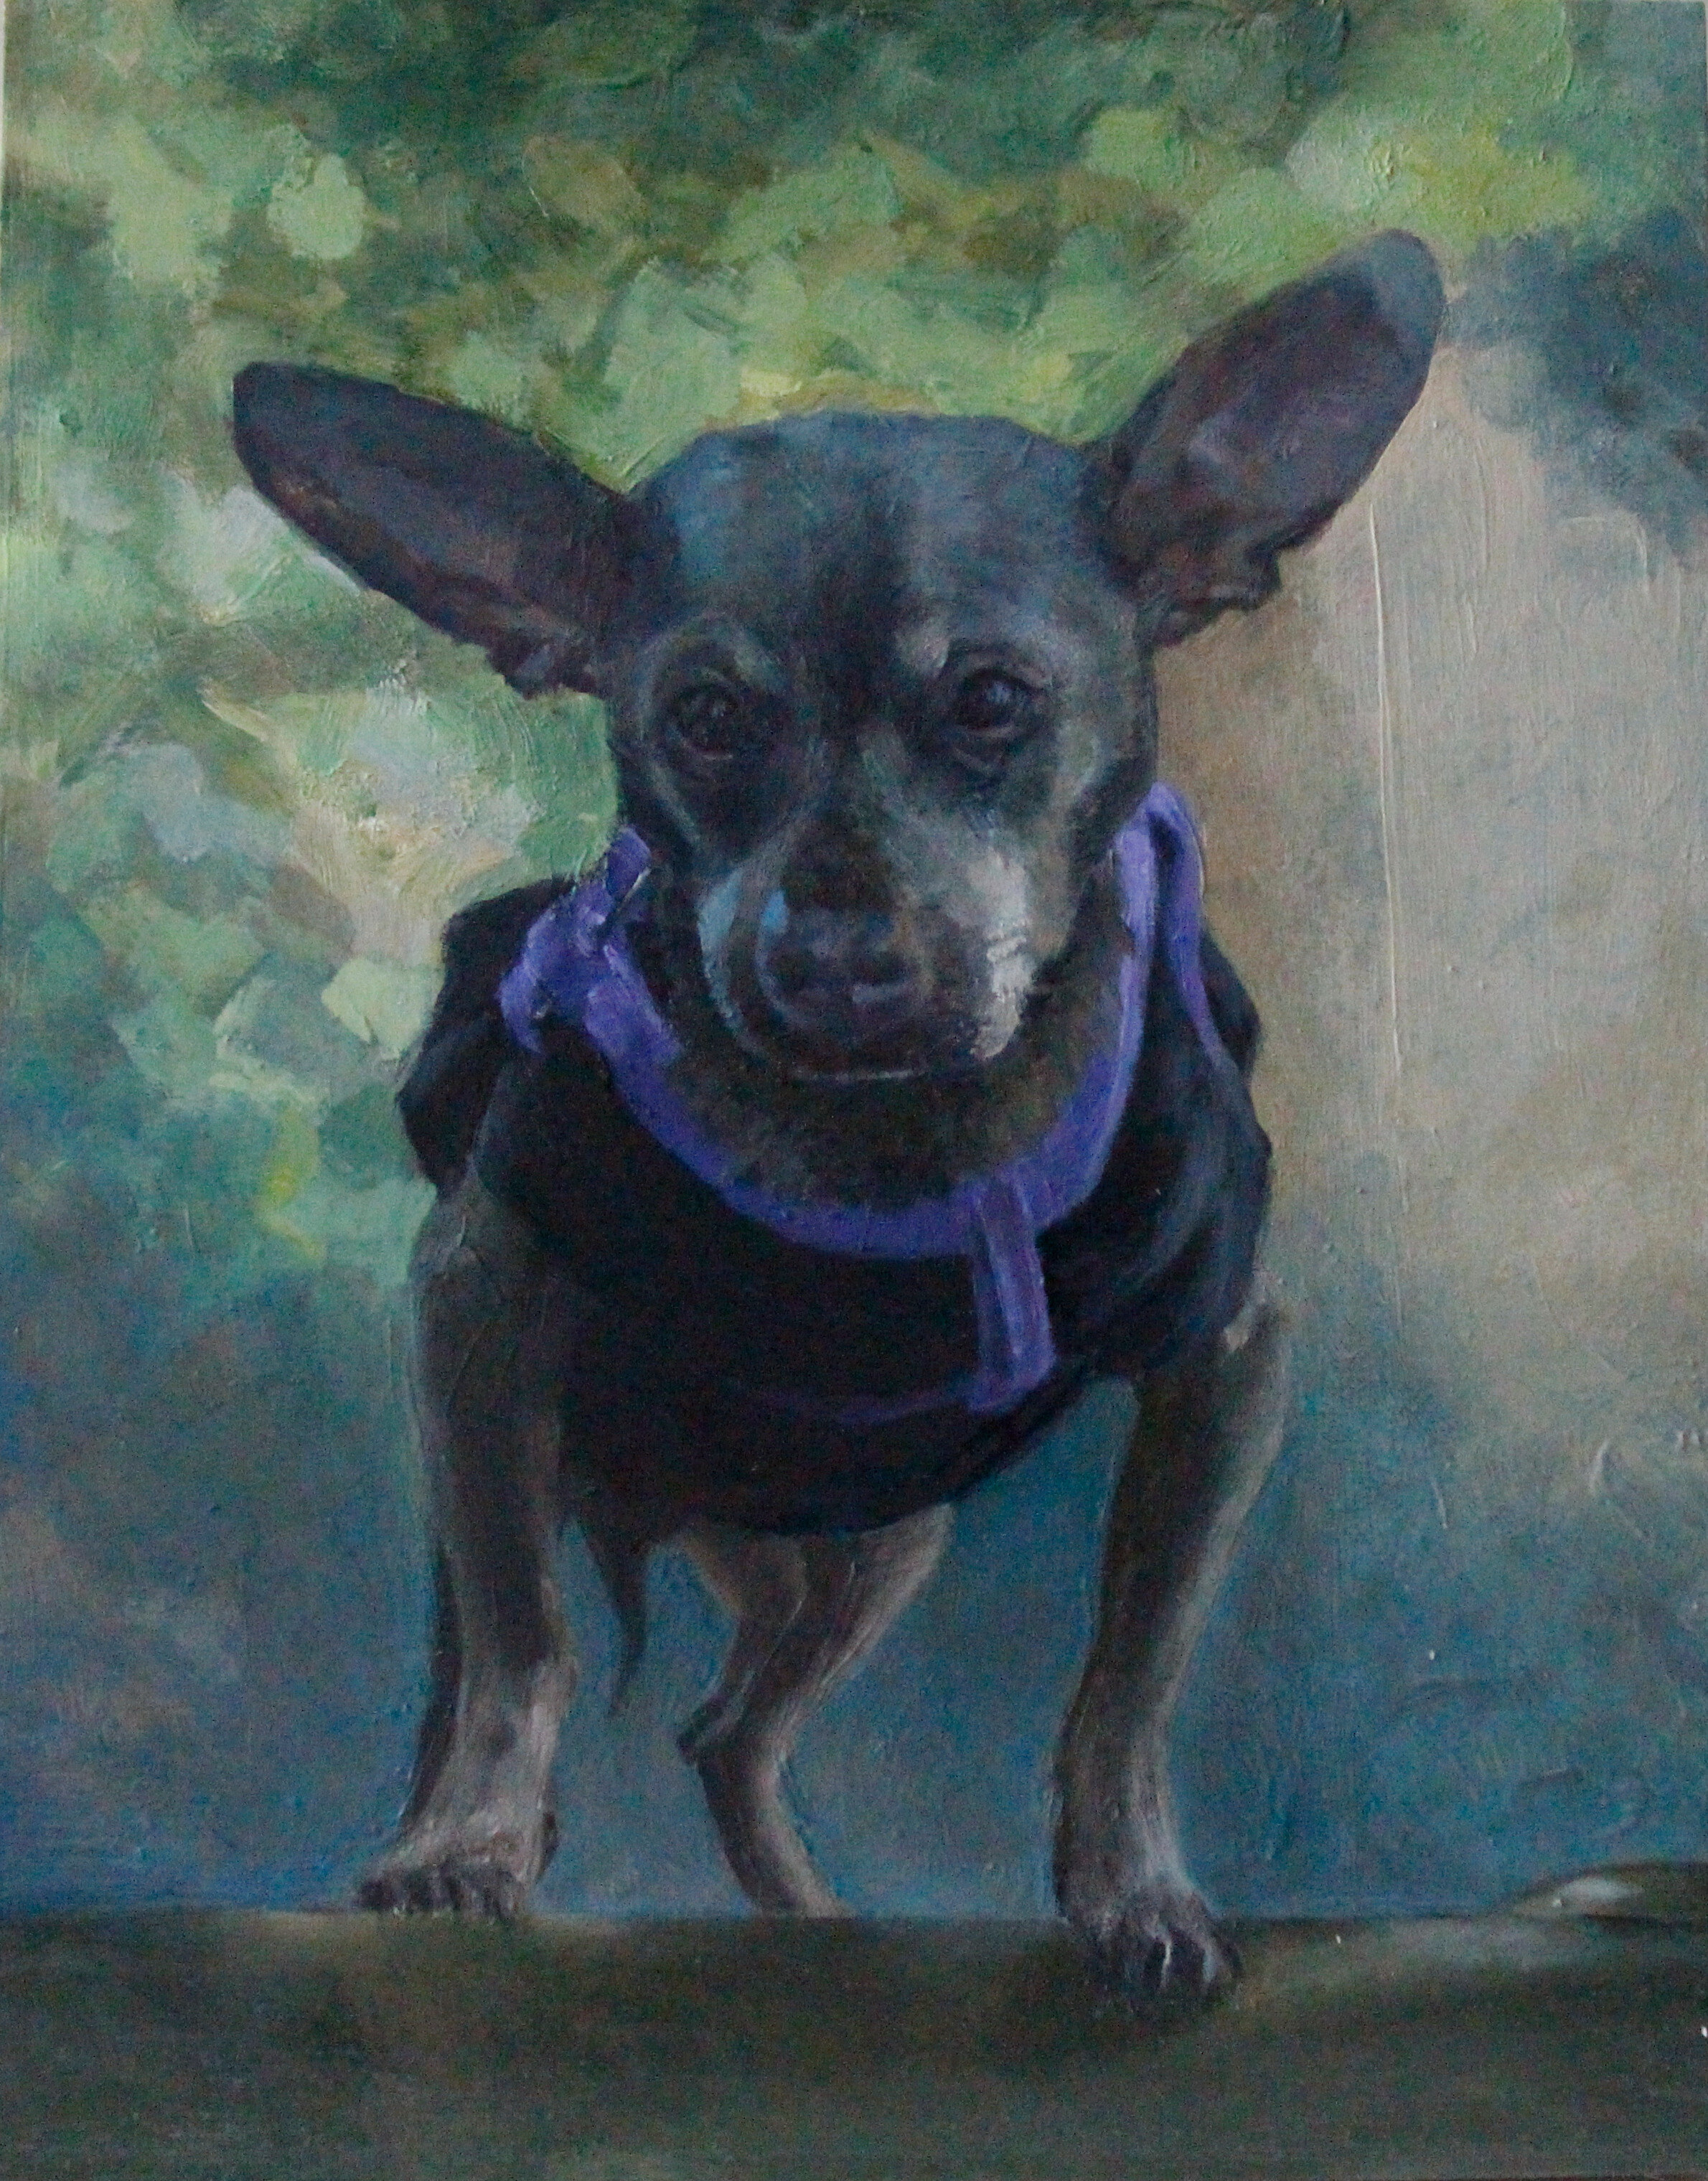 Buddy, 2019. Oil on board, 11x14 inches. Private collection.